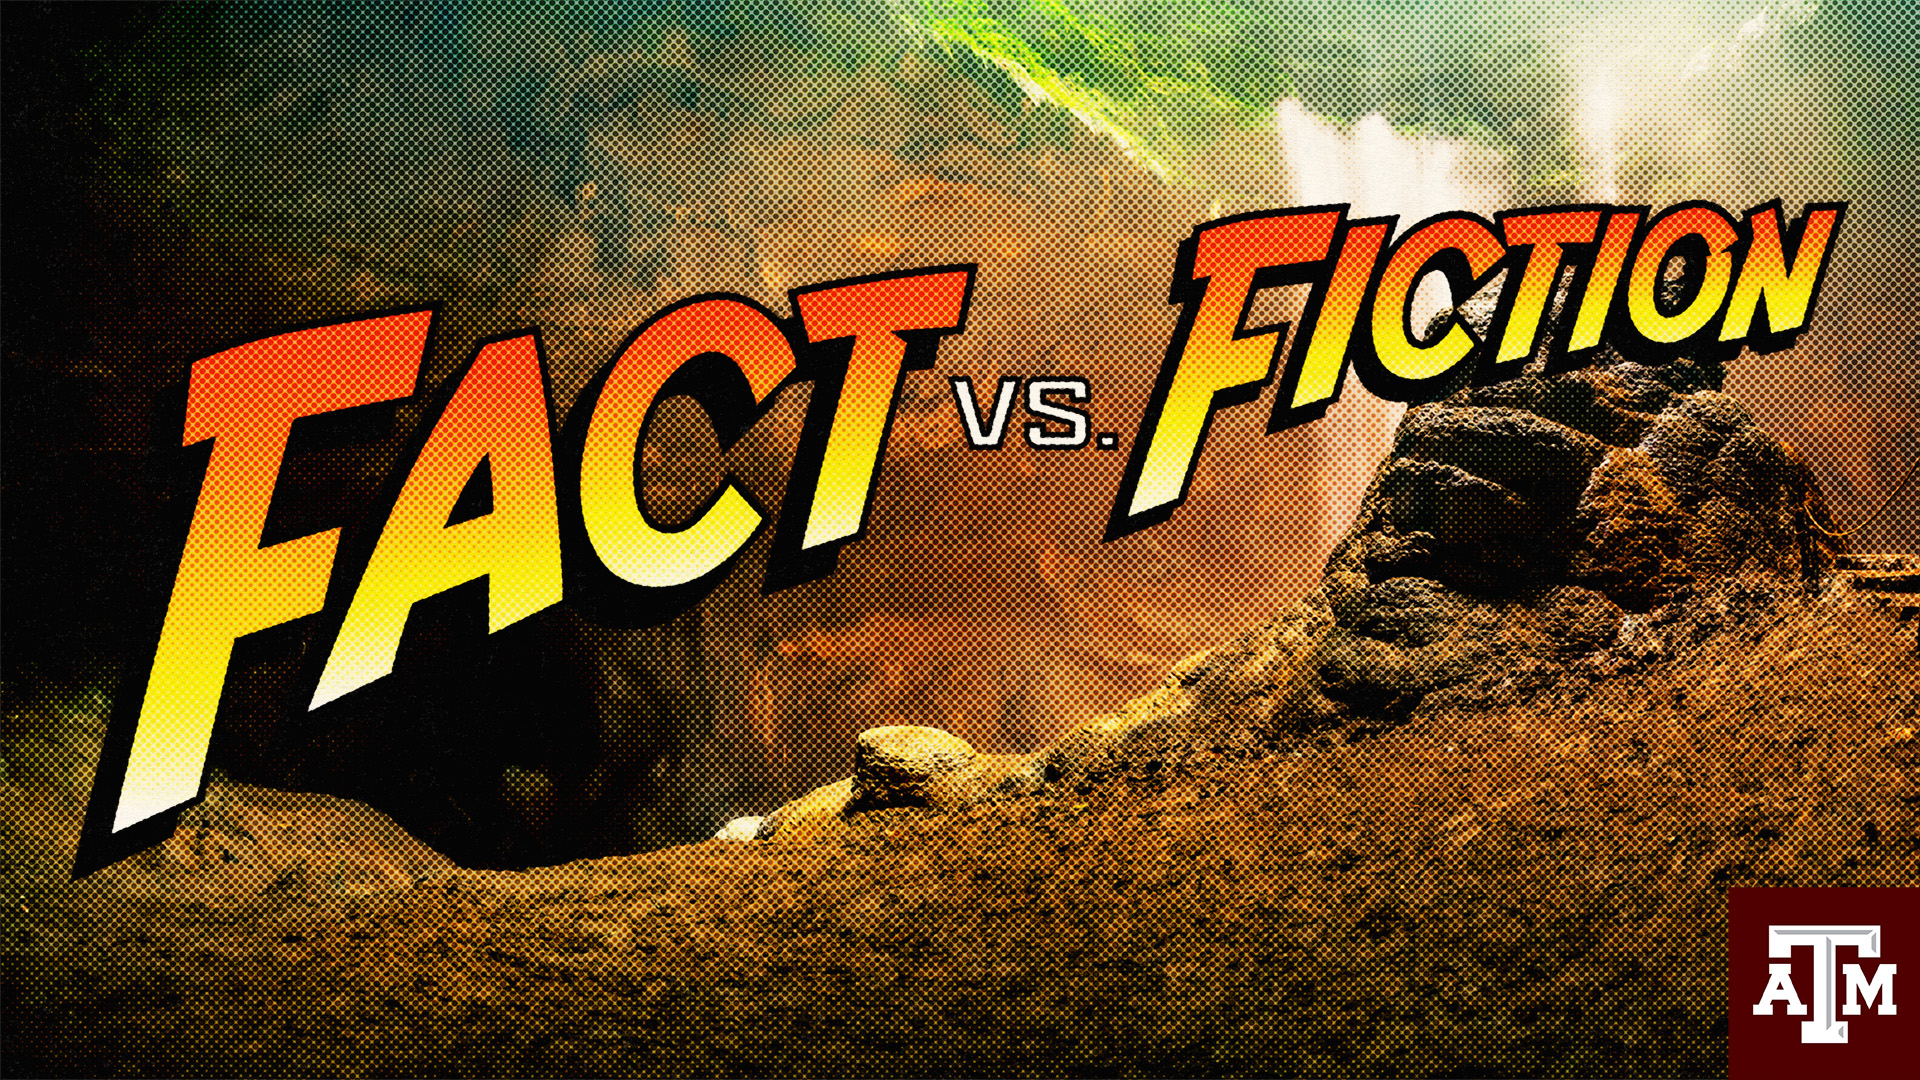 Graphic featuring a generic jungle background along with the words "Fact Vs. Fiction" in an orange-yellow gradient and the Texas A&amp;M University logo in maroon and white